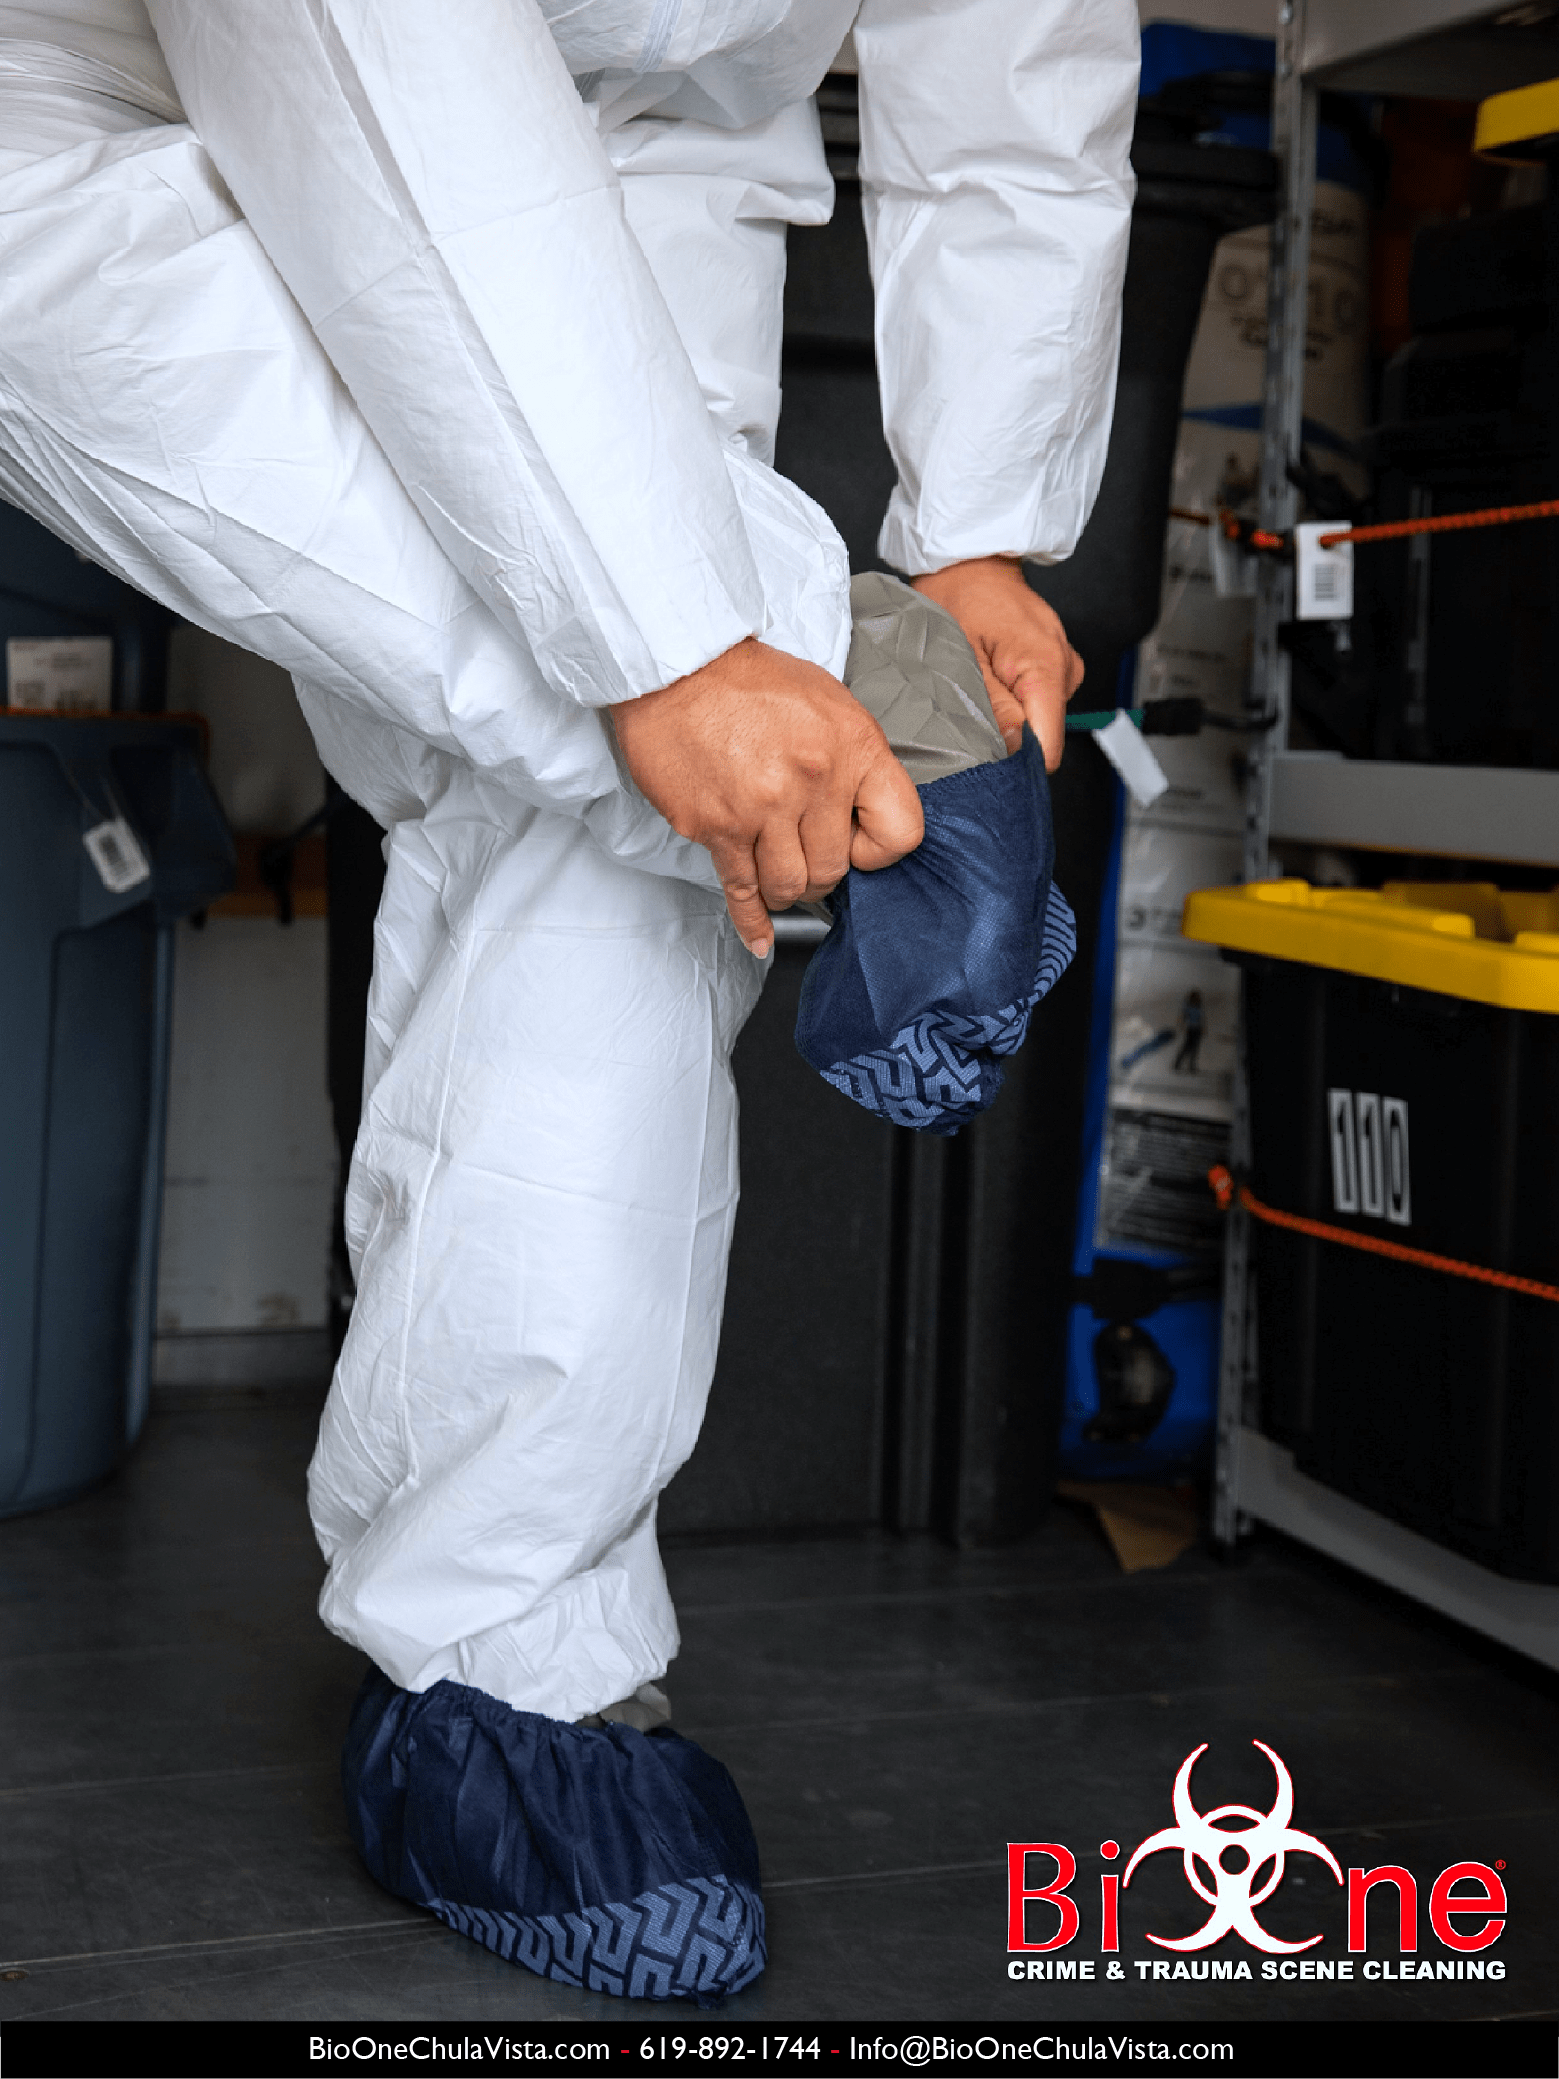 Image shows Bio-One technician dressing in PPE (shoe covers).